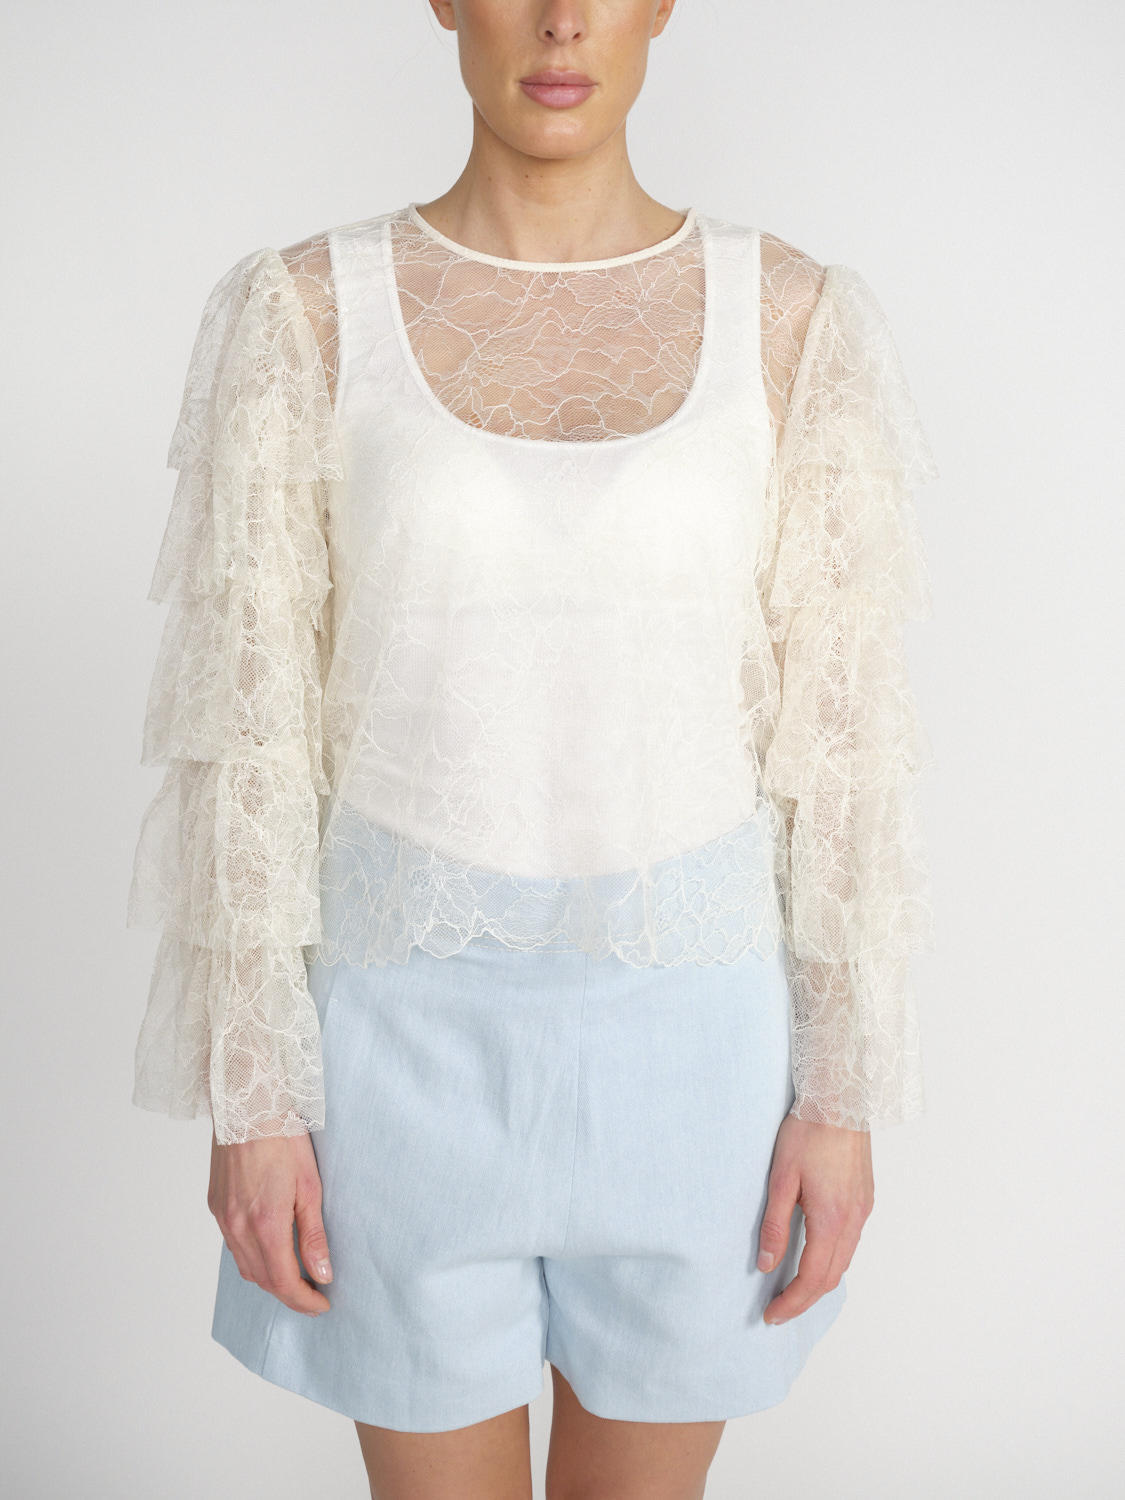 Layered - lace blouse with layered details 